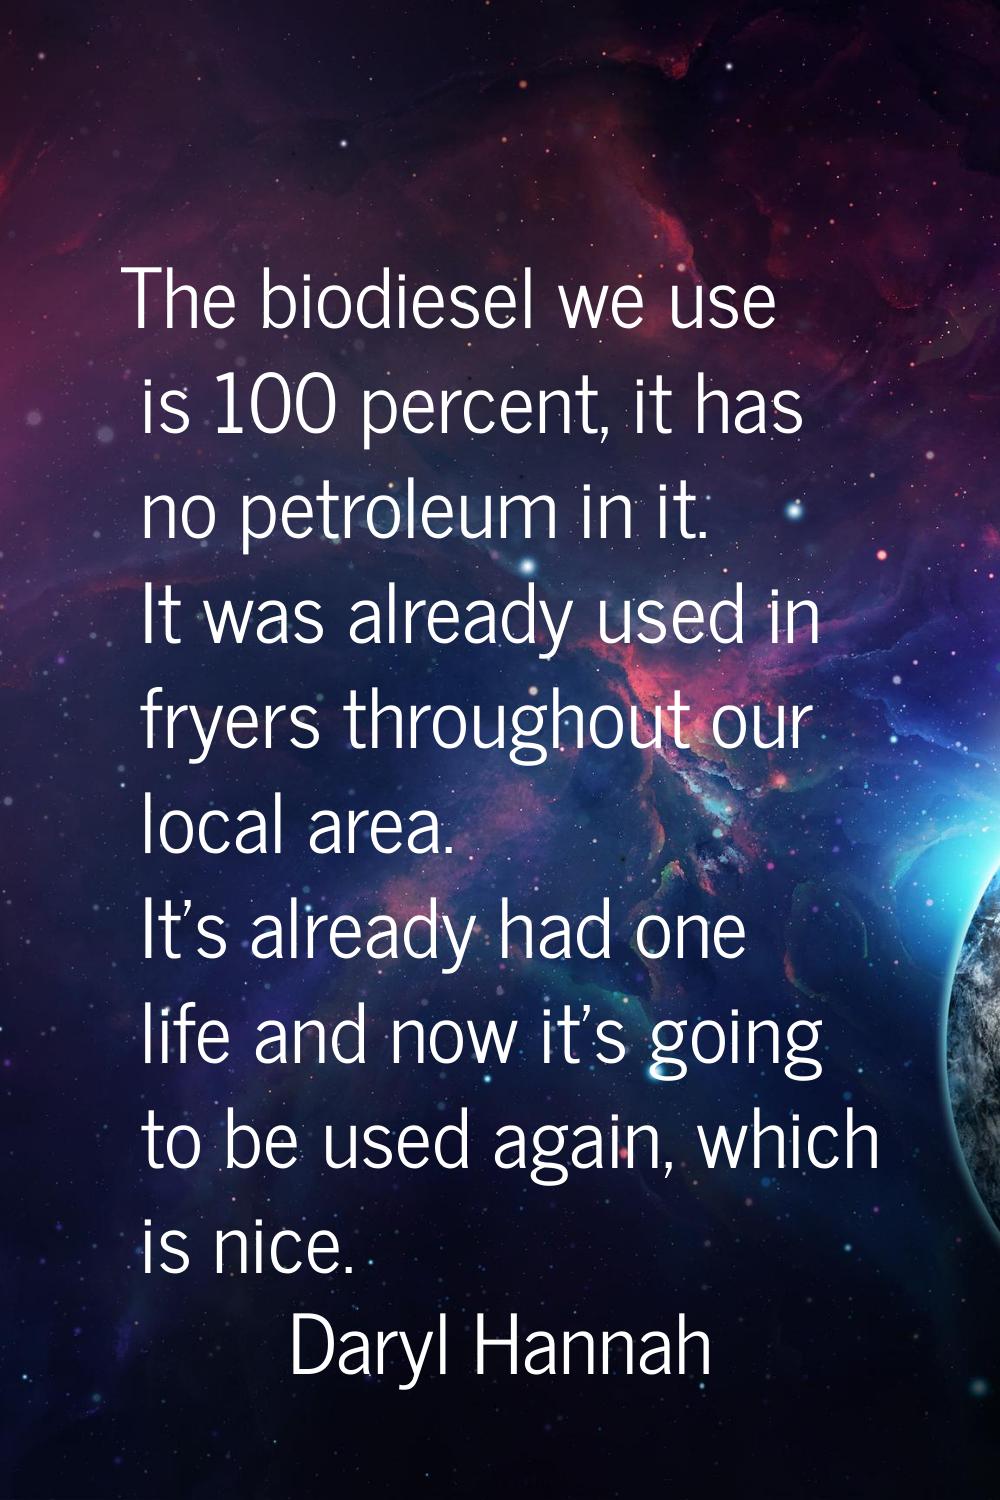 The biodiesel we use is 100 percent, it has no petroleum in it. It was already used in fryers throu